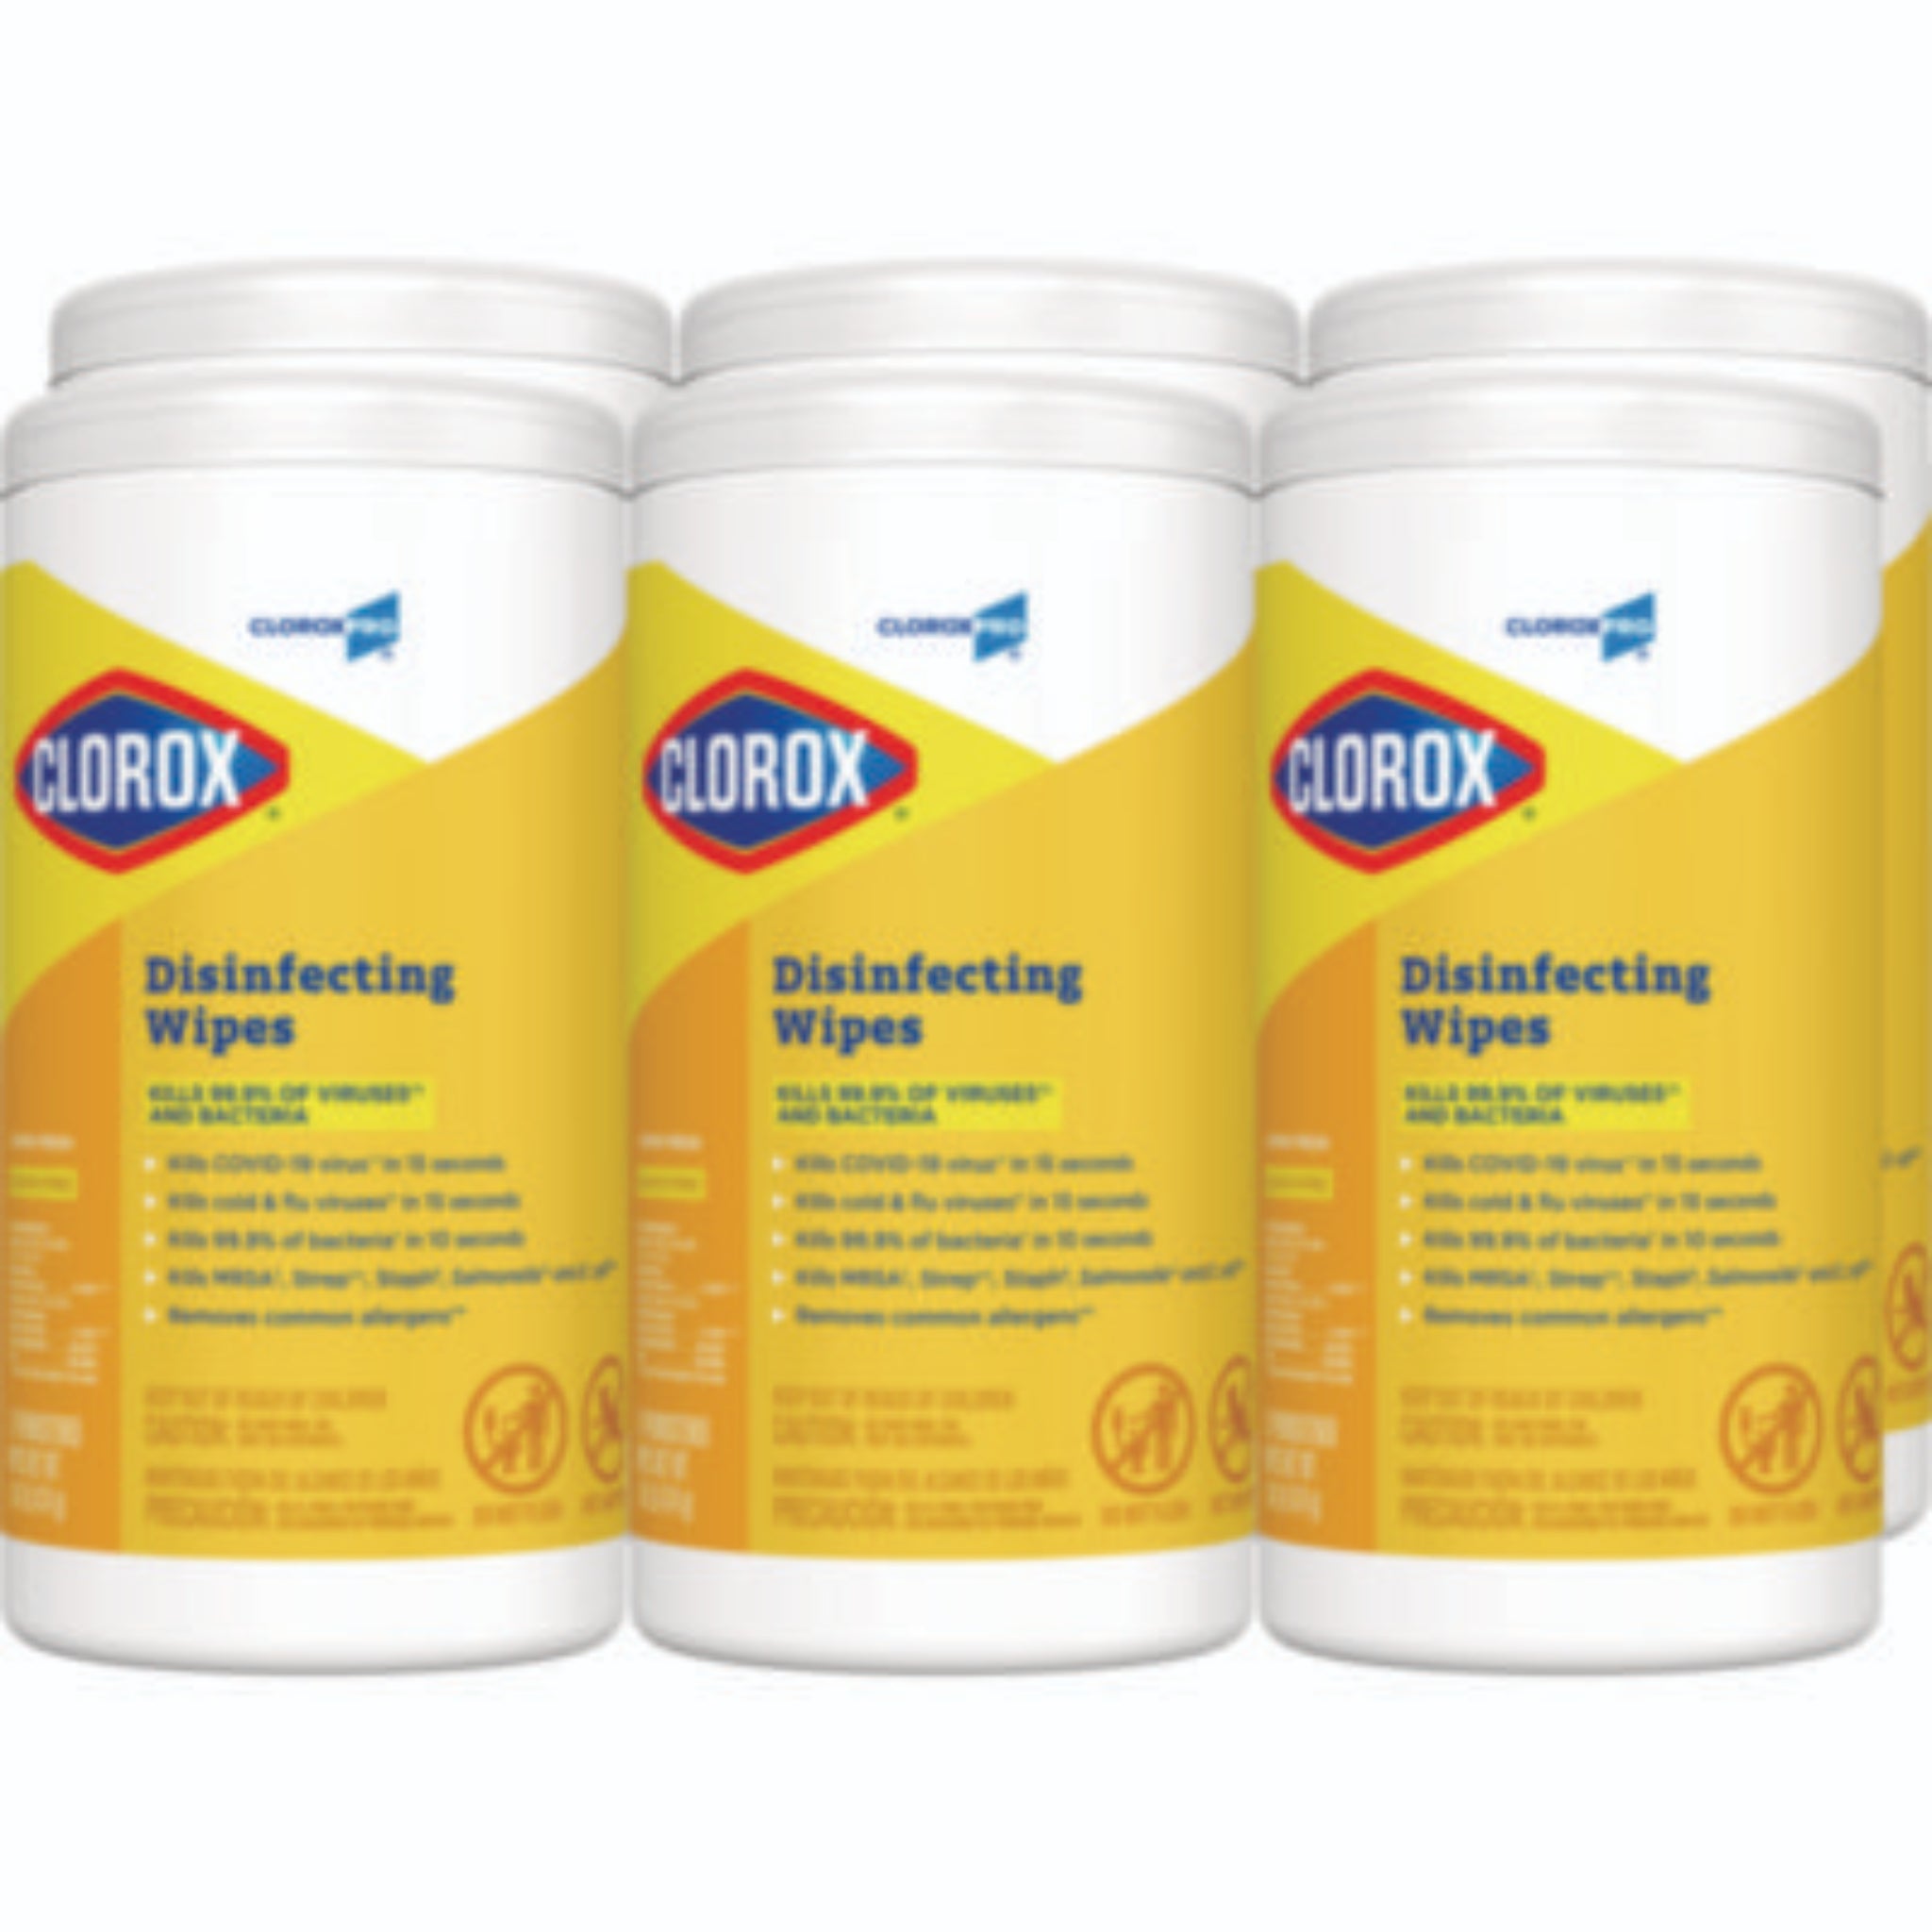 CLOROX SALES CO. CLO15948CT Disinfecting Wipes, 1-Ply, 7 x 8, Lemon Fresh, White, Canister of 75, Carton of 6 Canisters